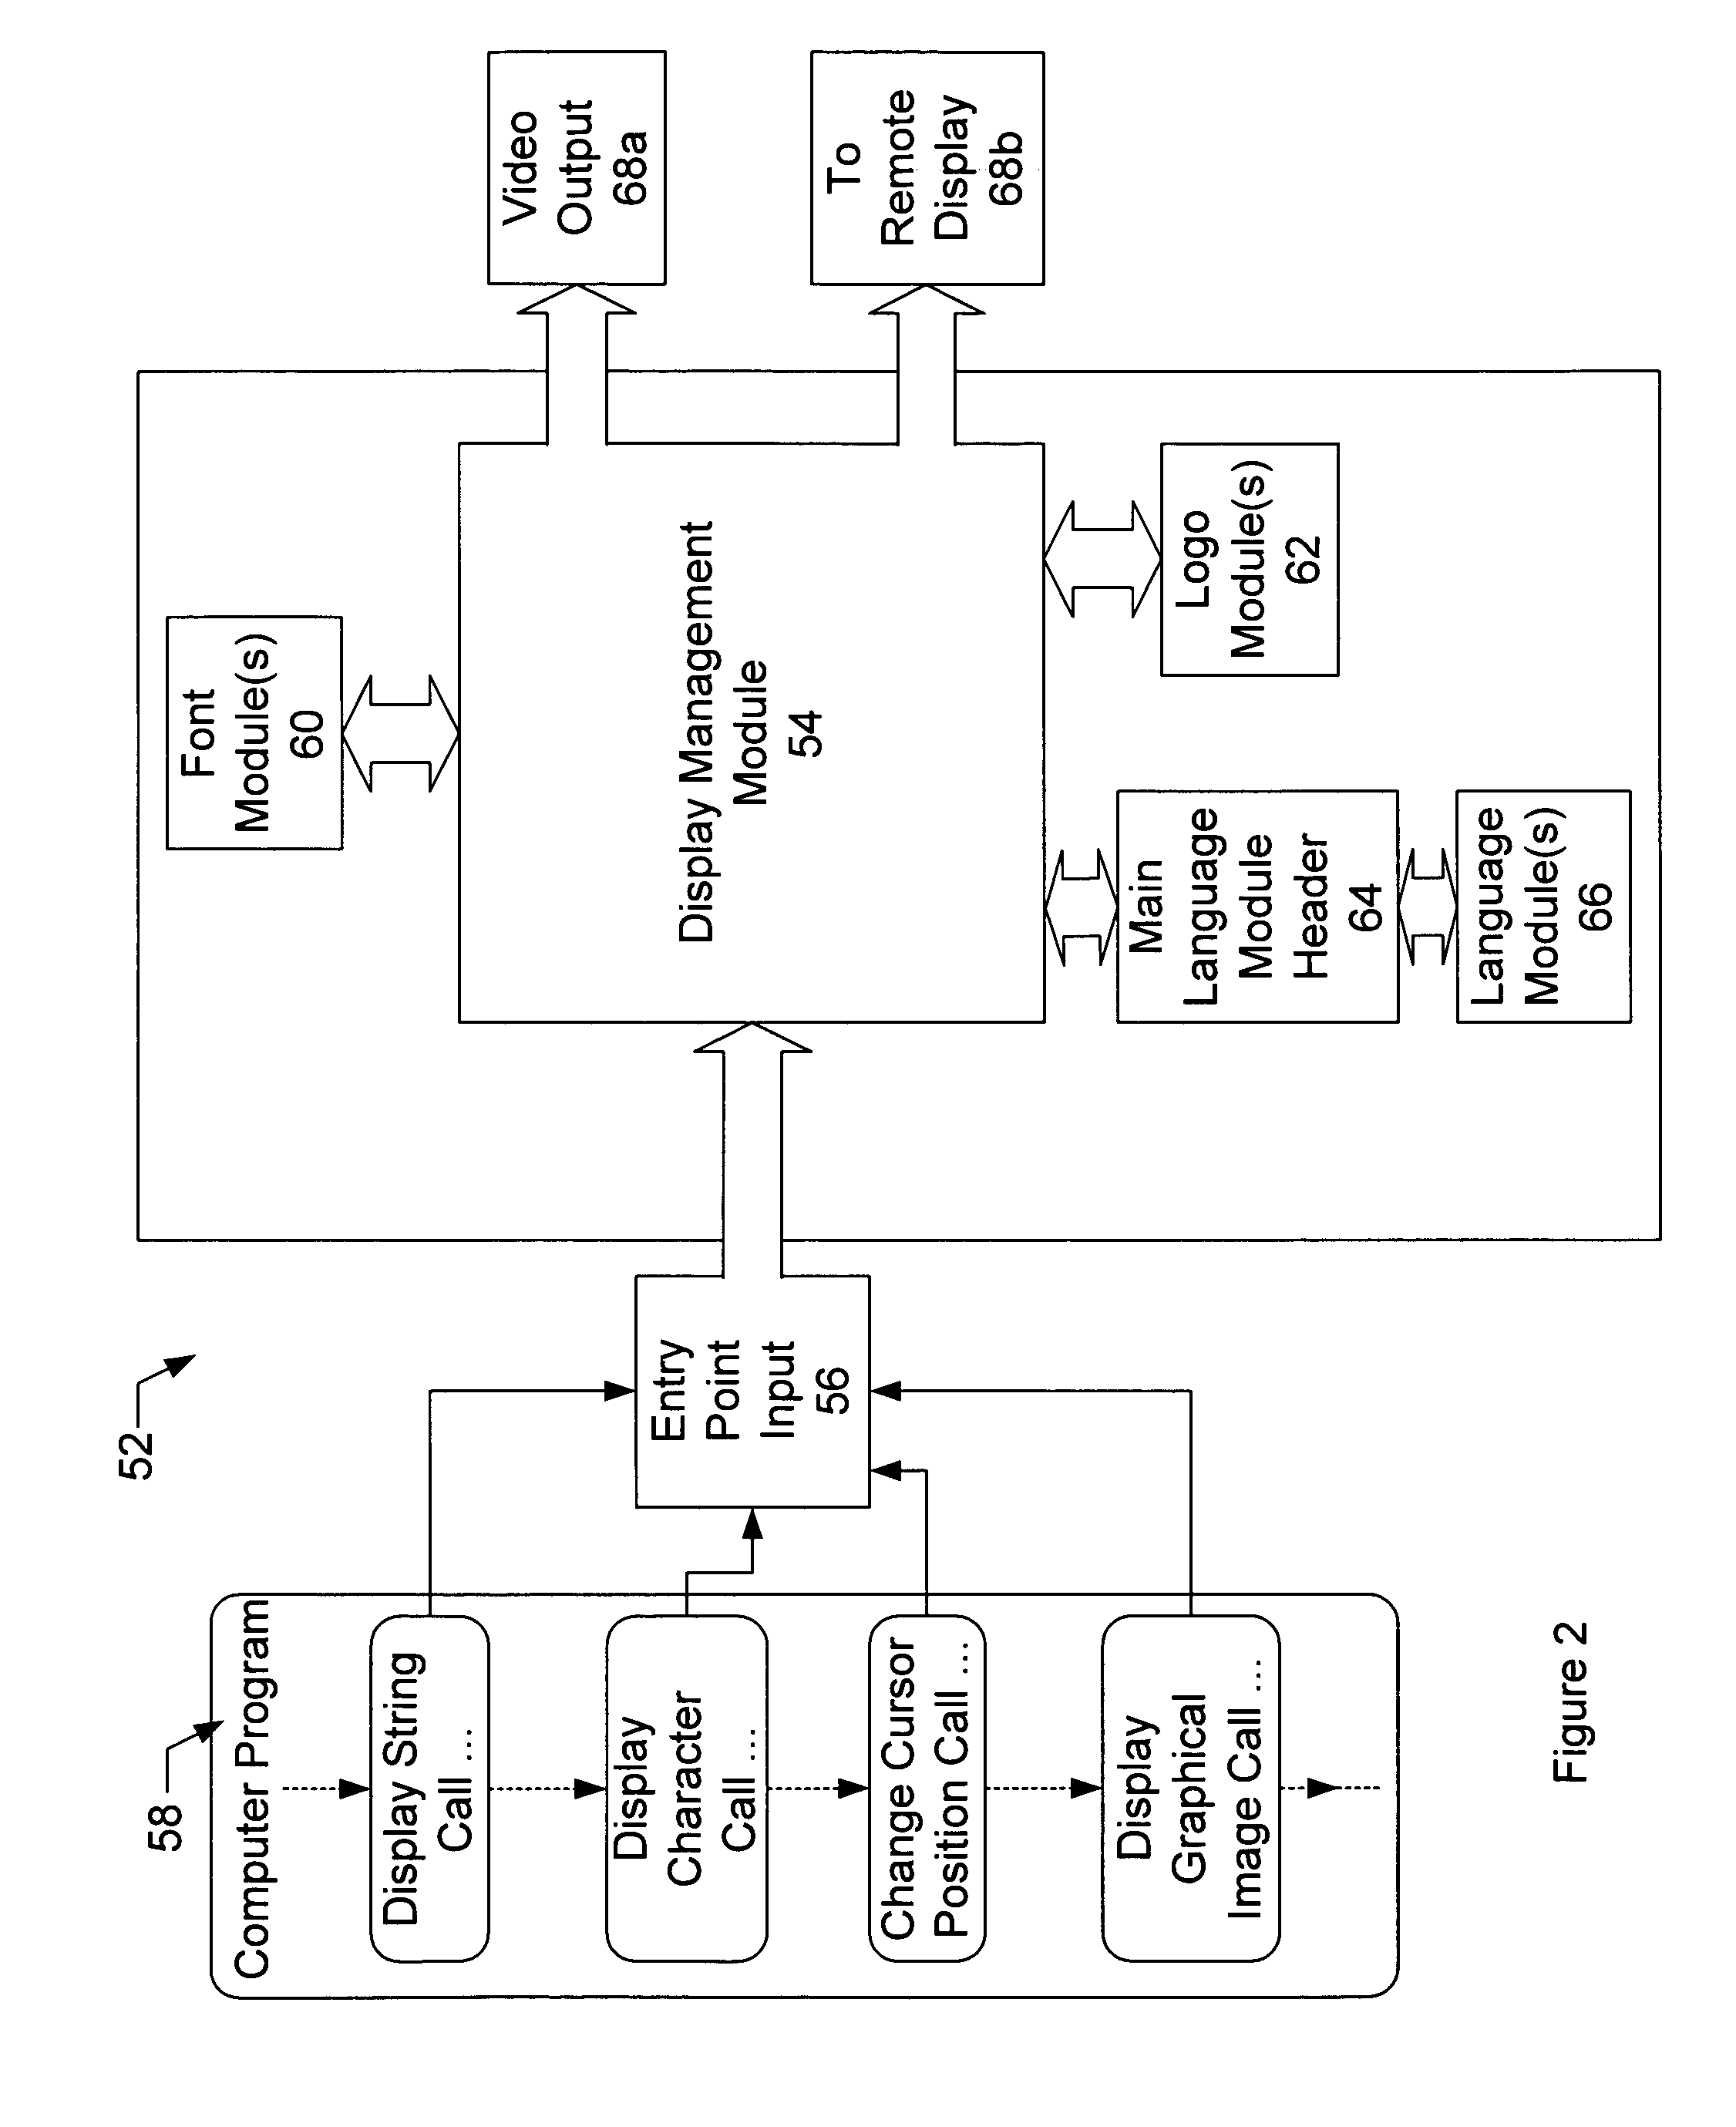 Systems, methods, and computer program products for redirecting the display of information from a computer program to a remote display terminal